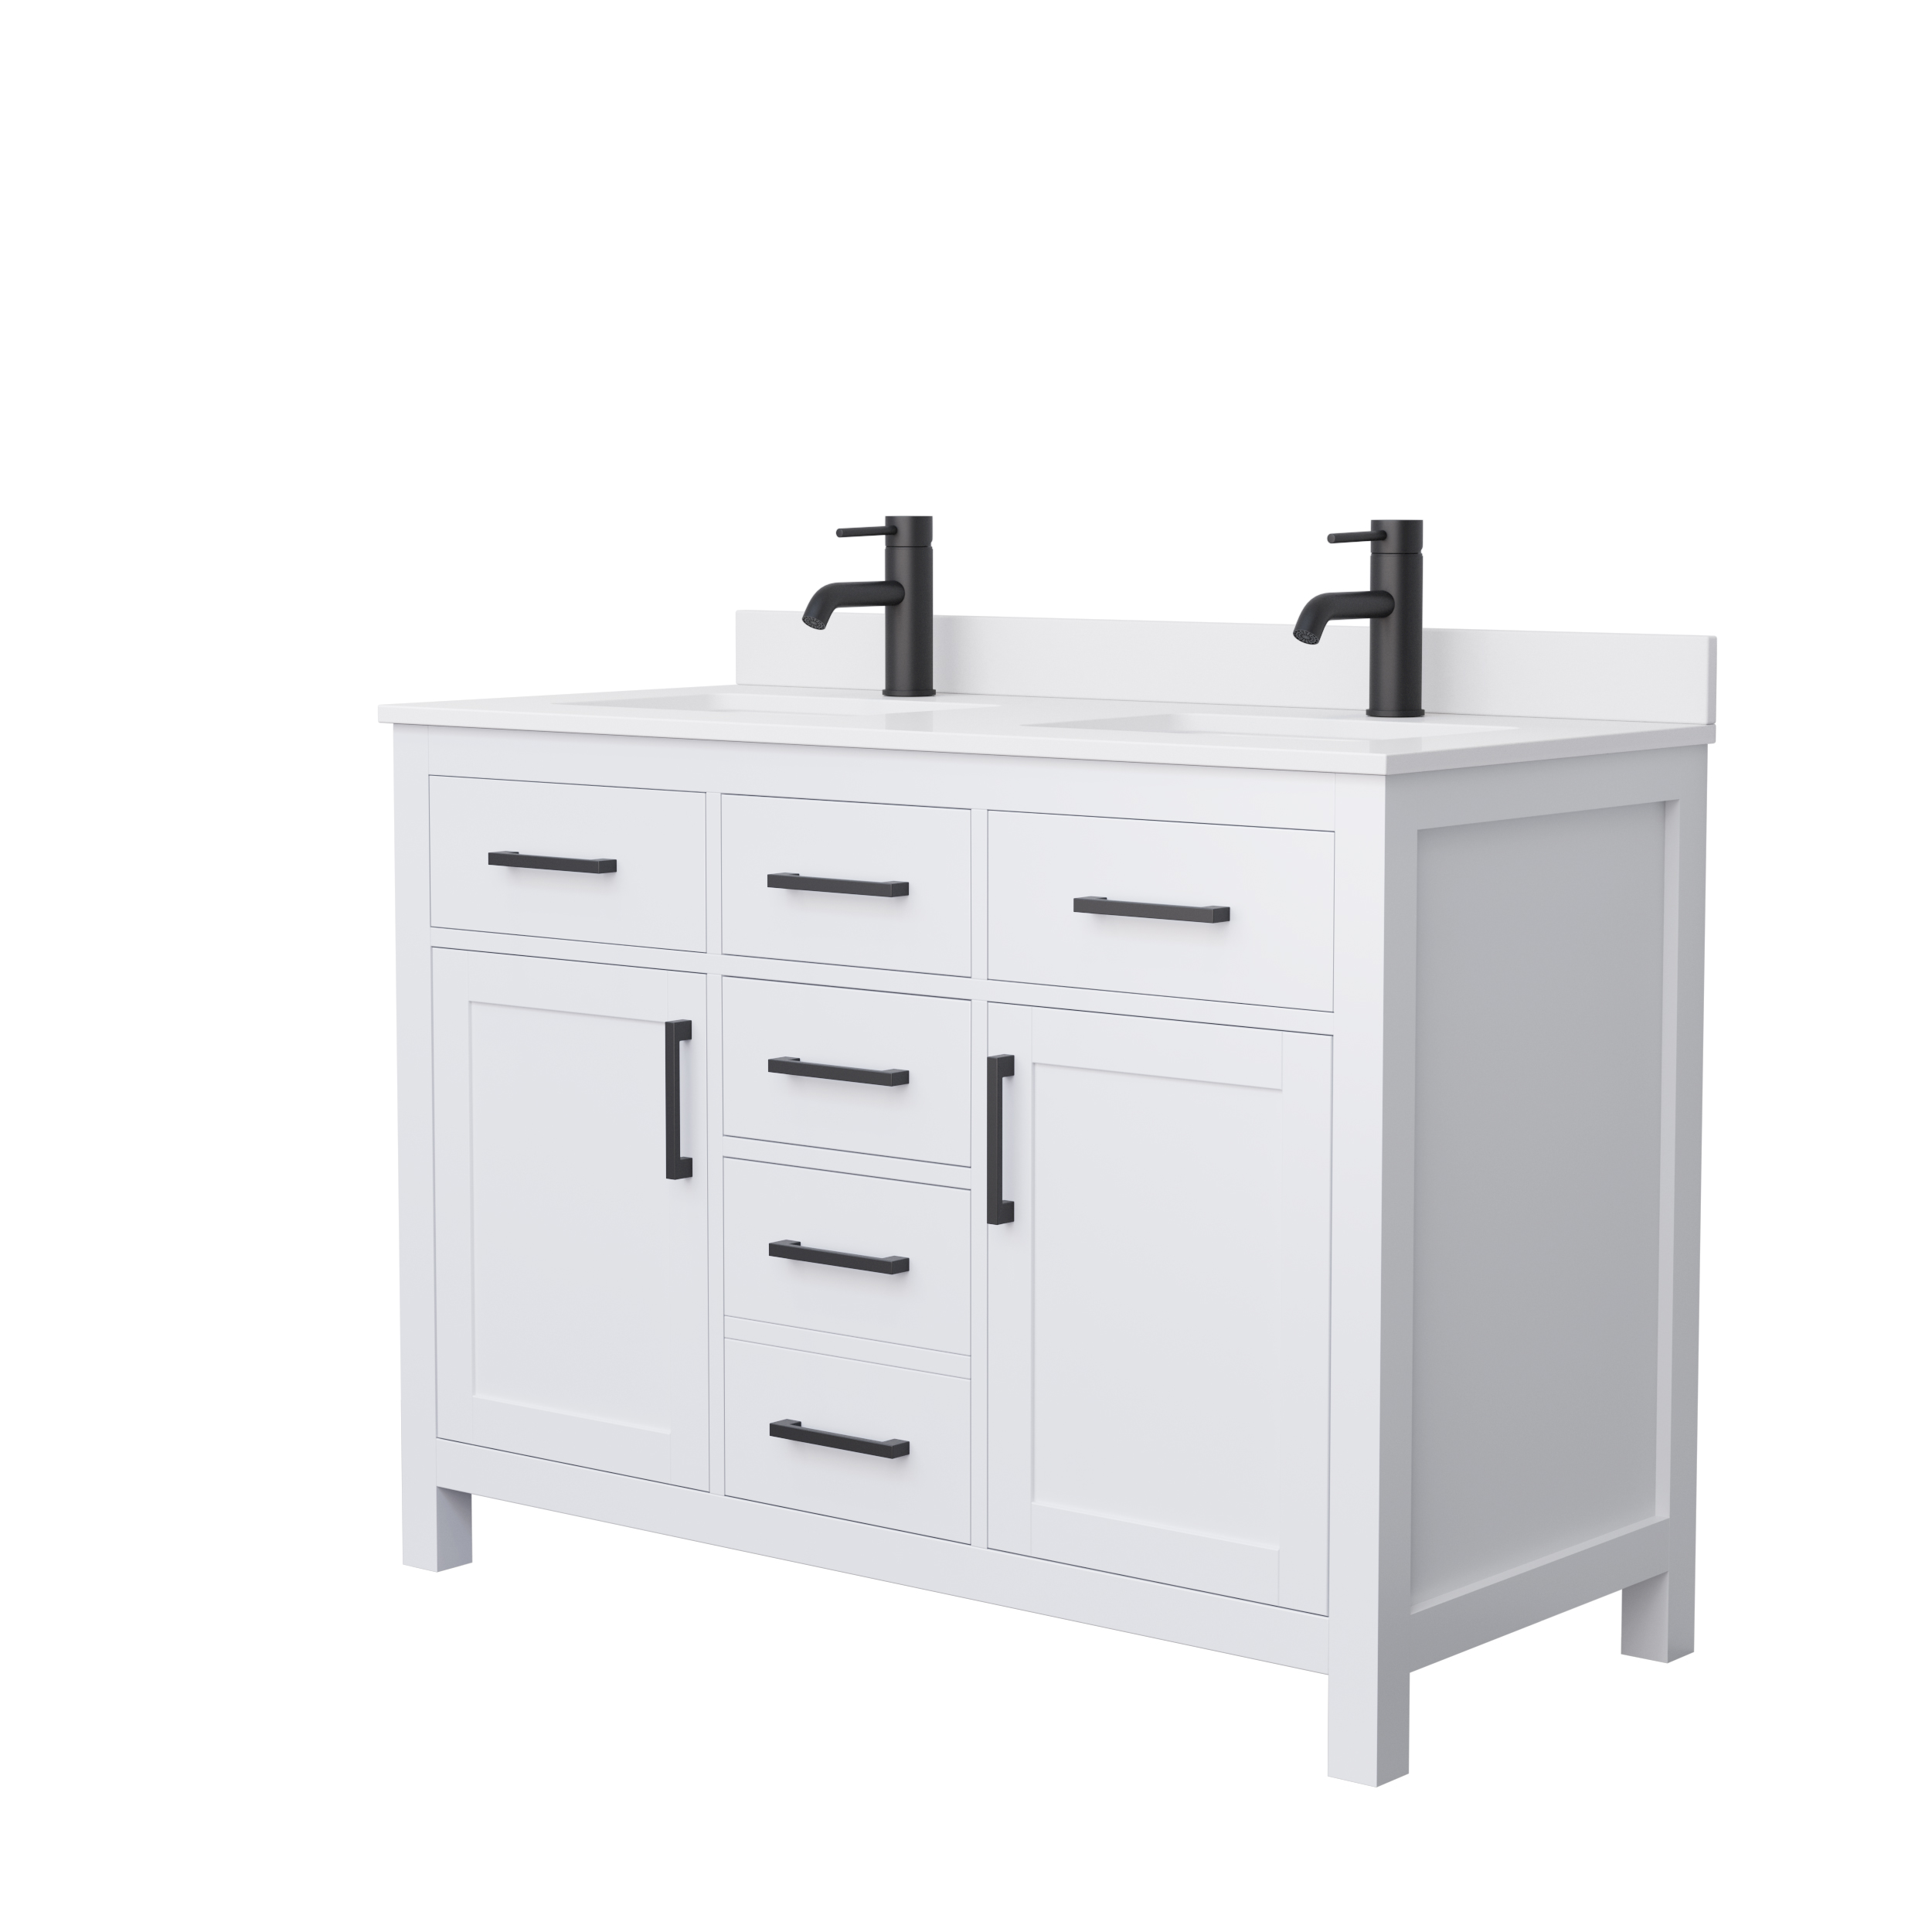 beckett 48" double bathroom vanity by wyndham collection - white